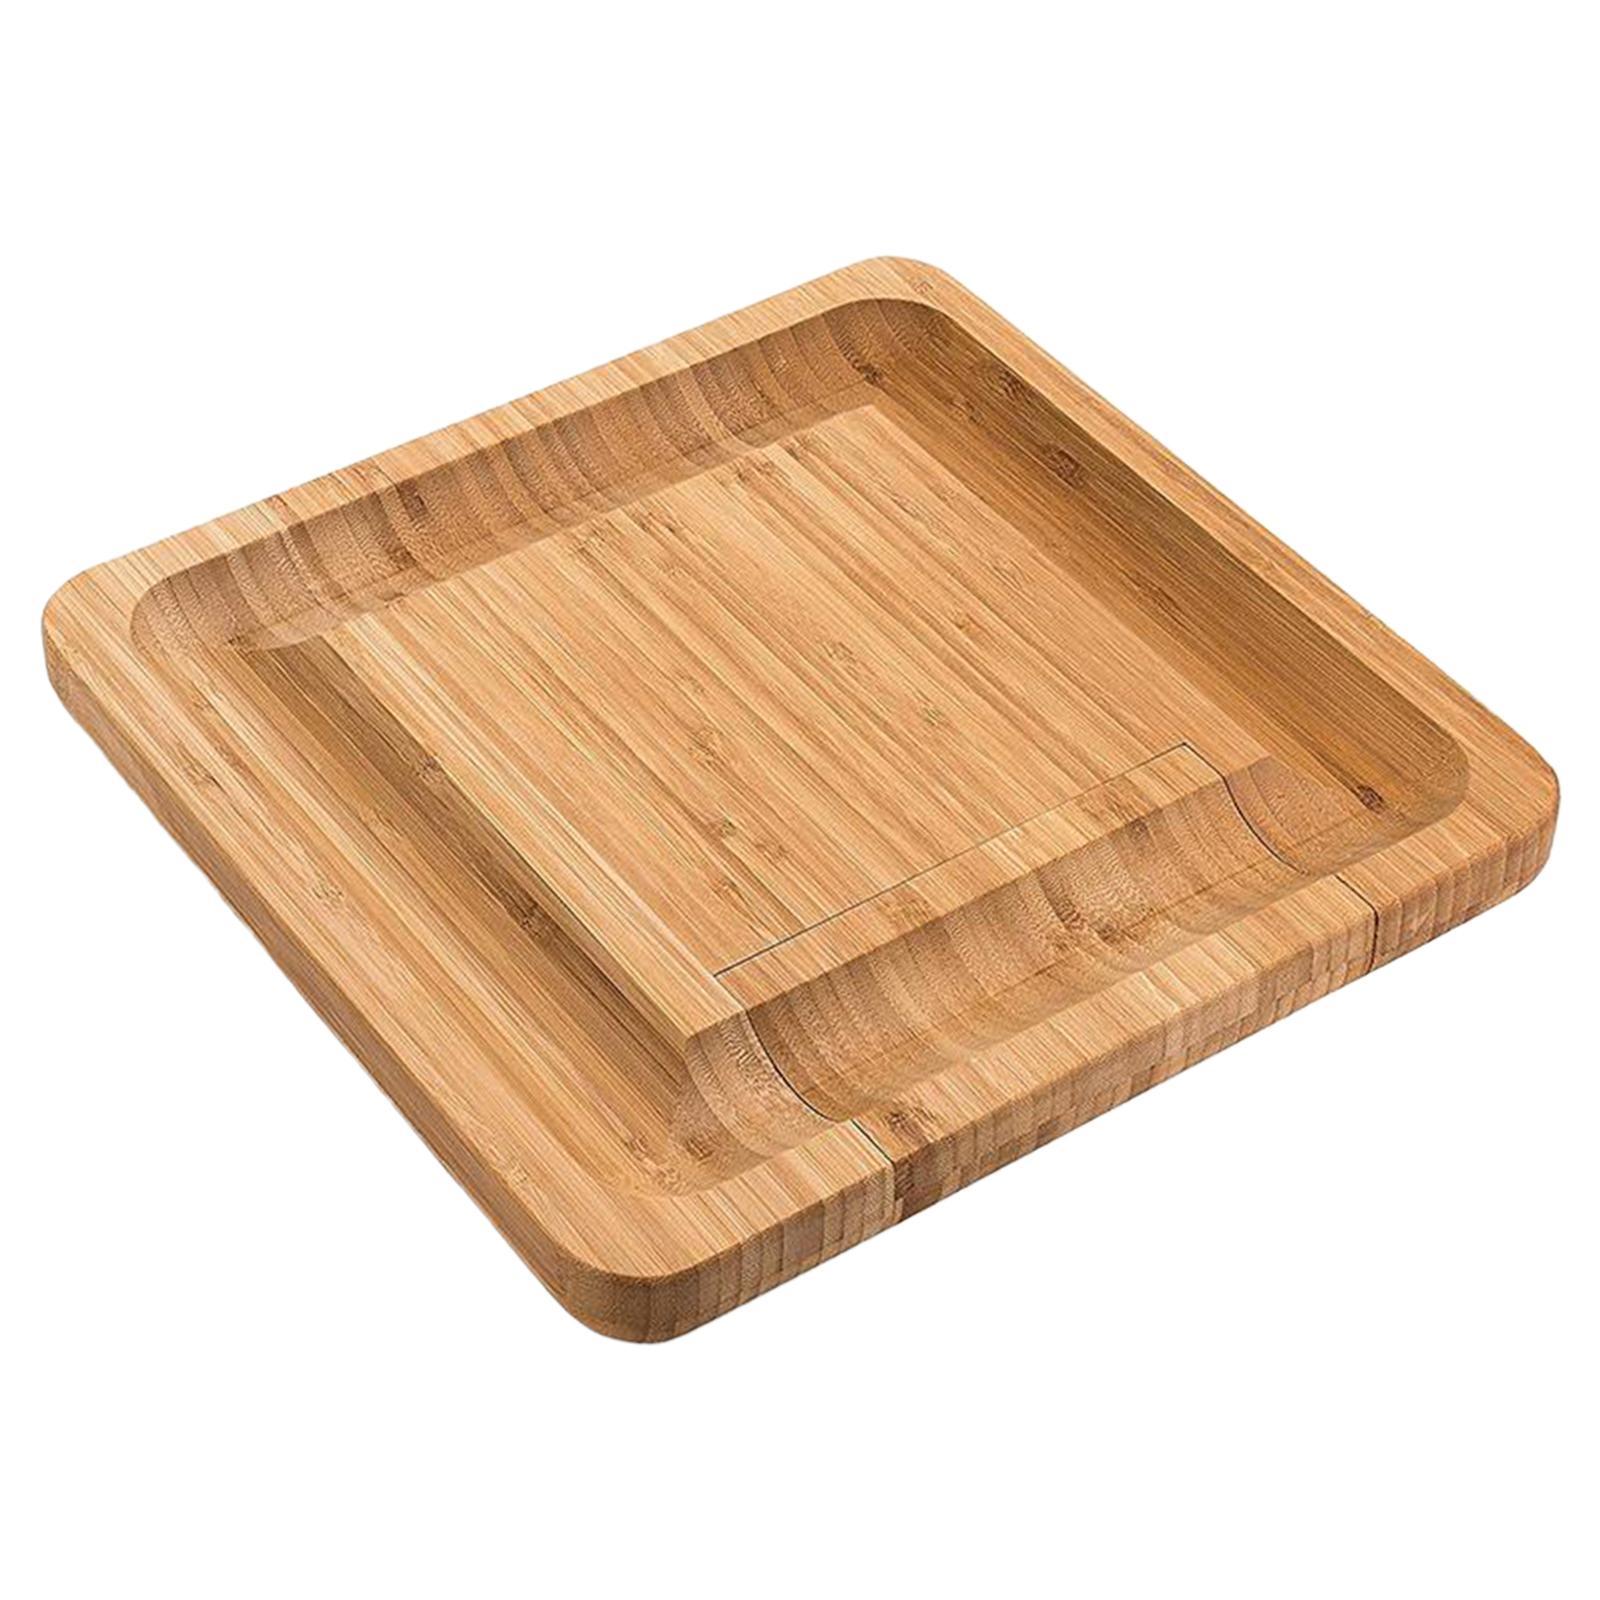 Bamboo Cheese Board & Slide Out Drawer Cooking Tools Household Serving Tray